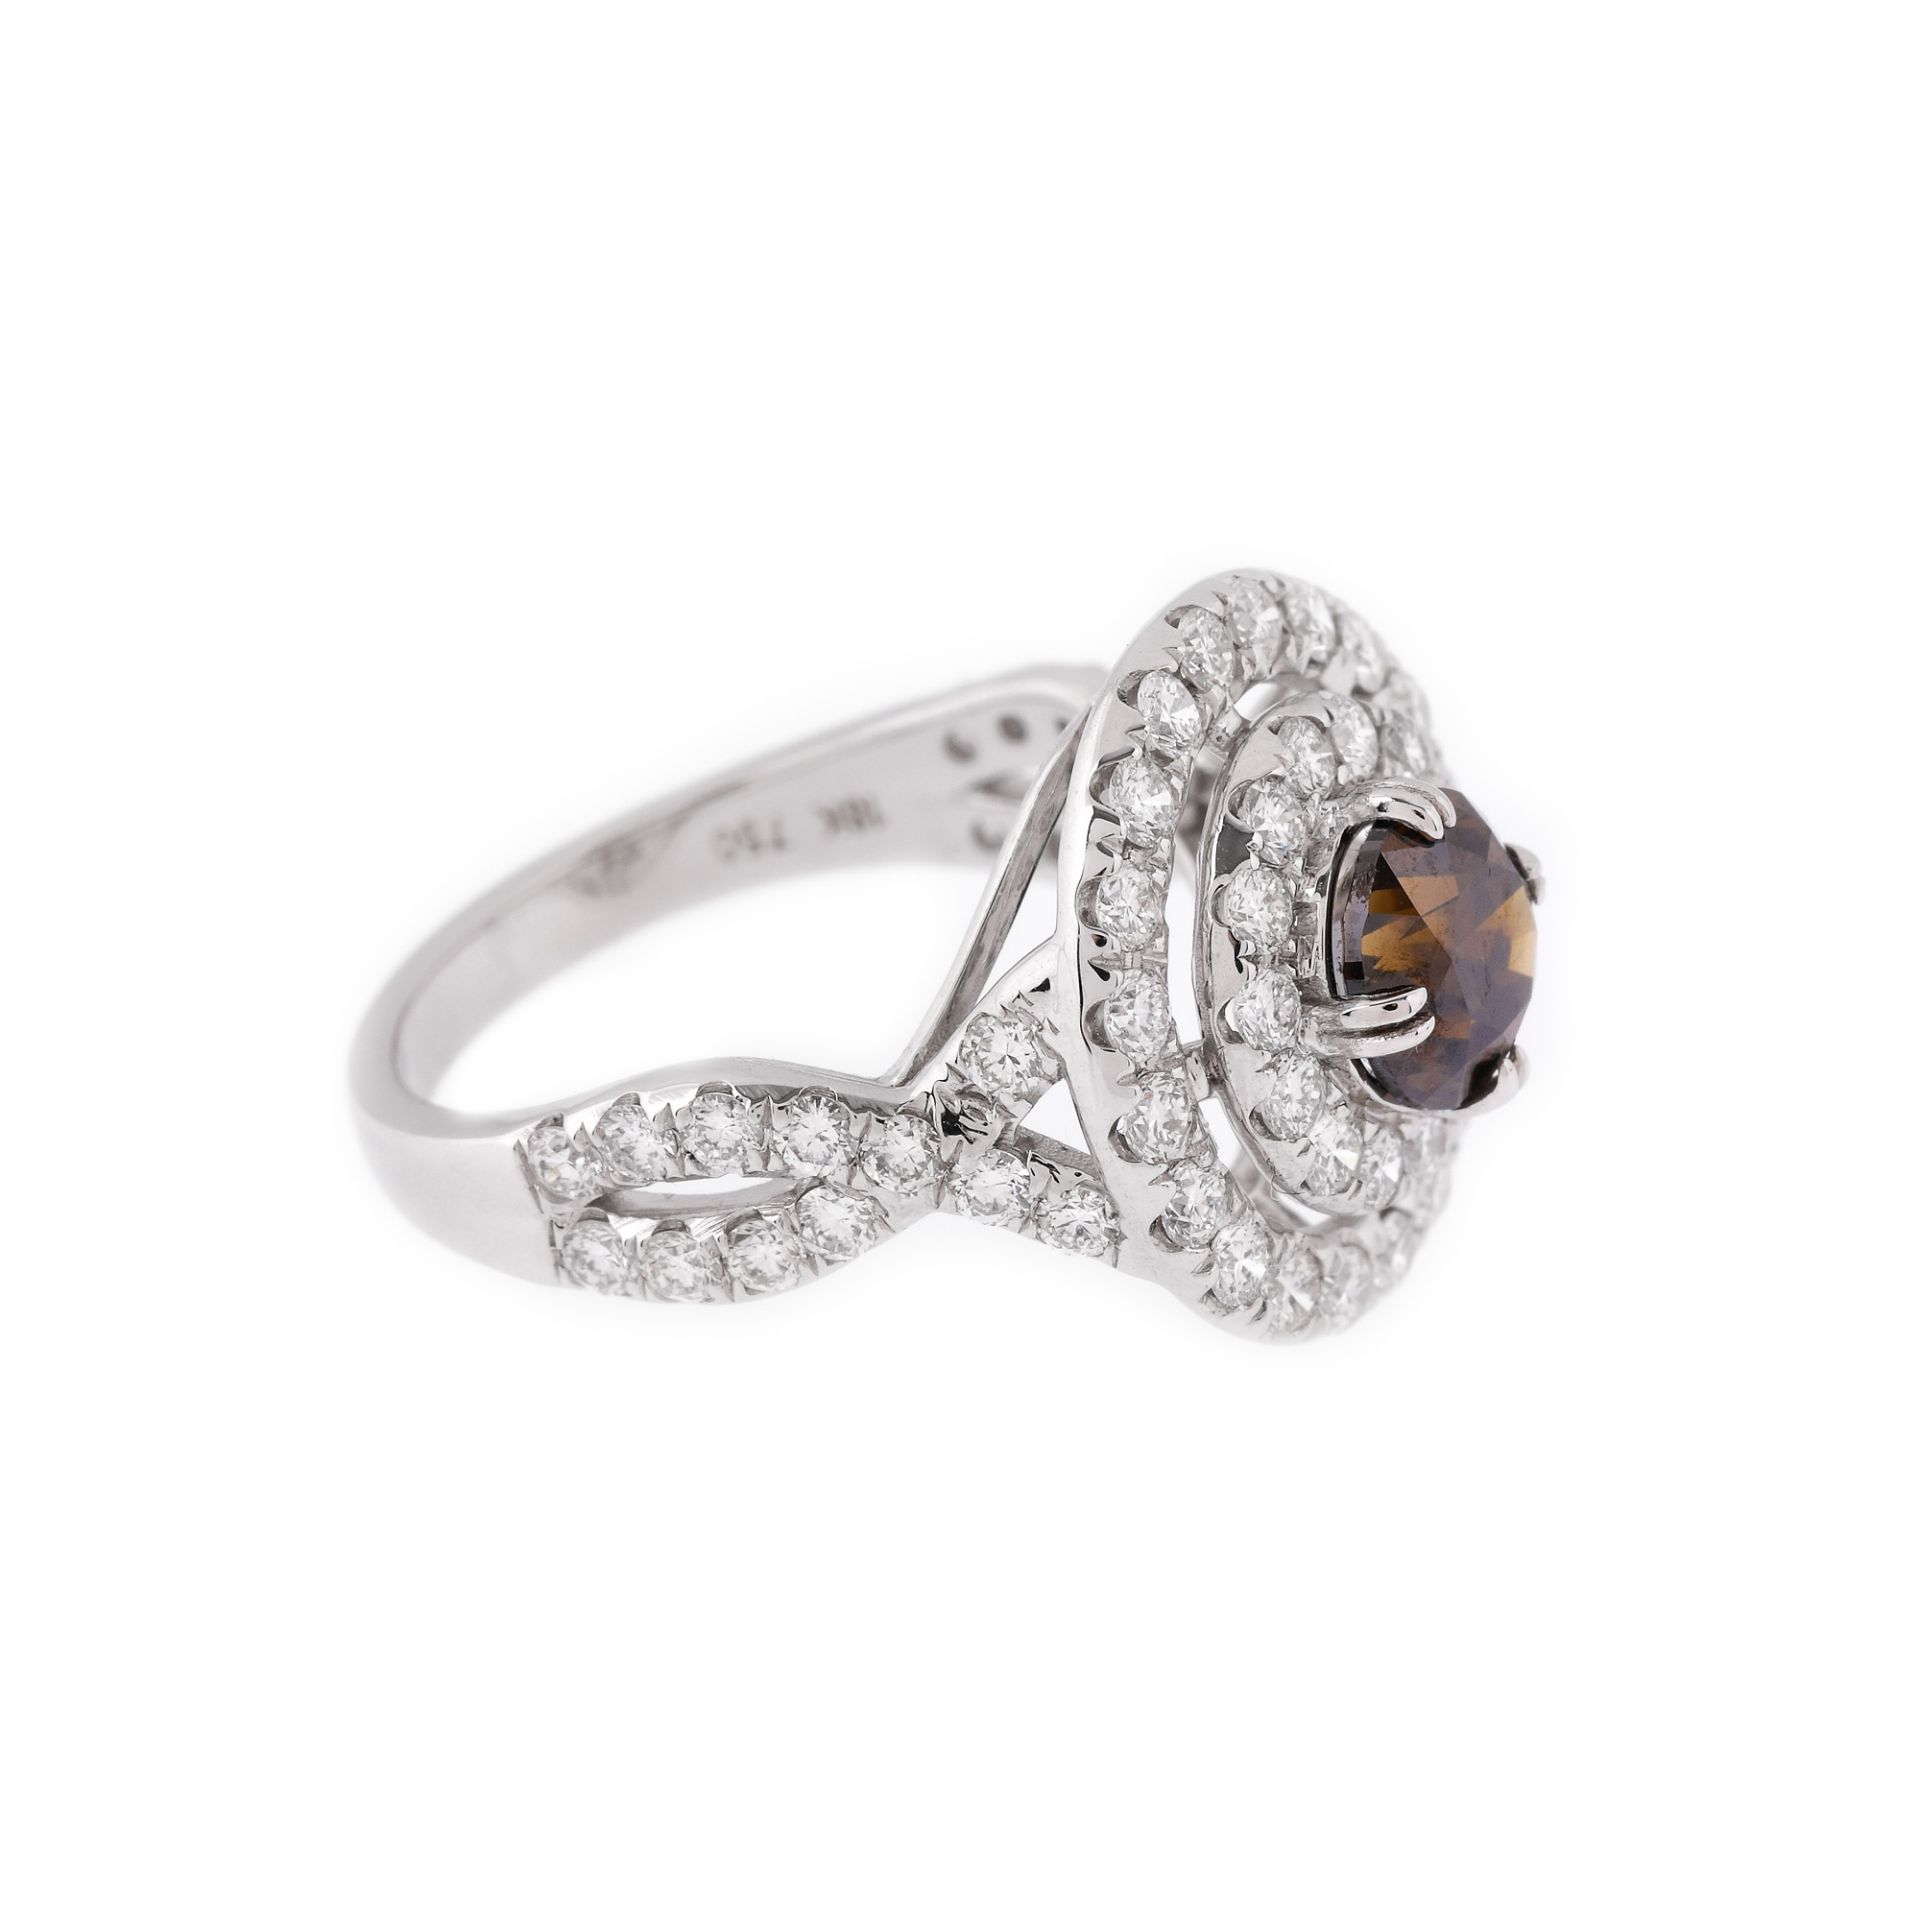 White gold ring, centrally decorated with deep orange brown diamond, surrounded by two rows of brill - Image 2 of 3